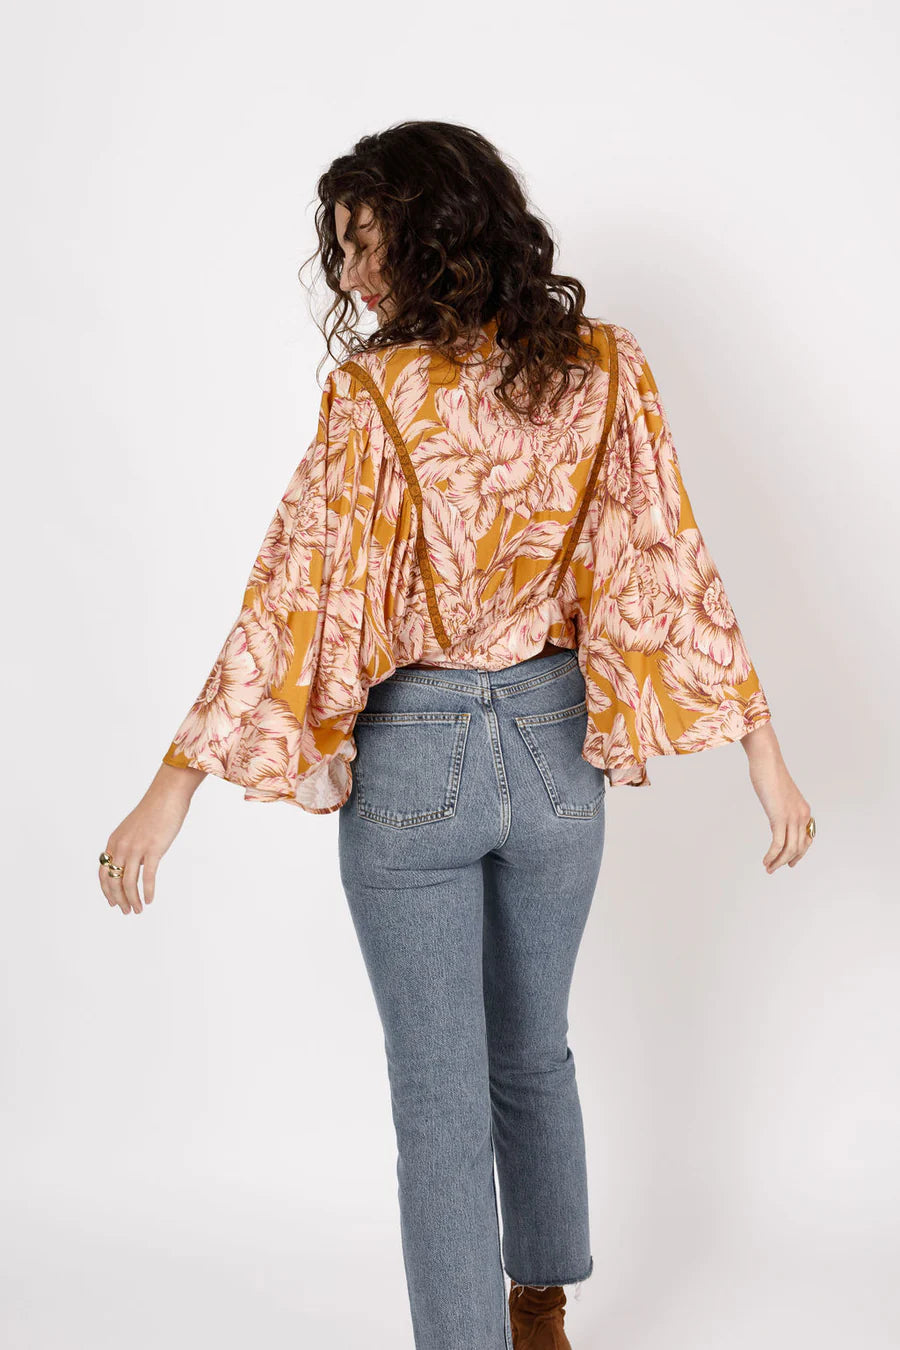 LIBBY GOLD FLORAL BELL SLEEVE CROP TOP